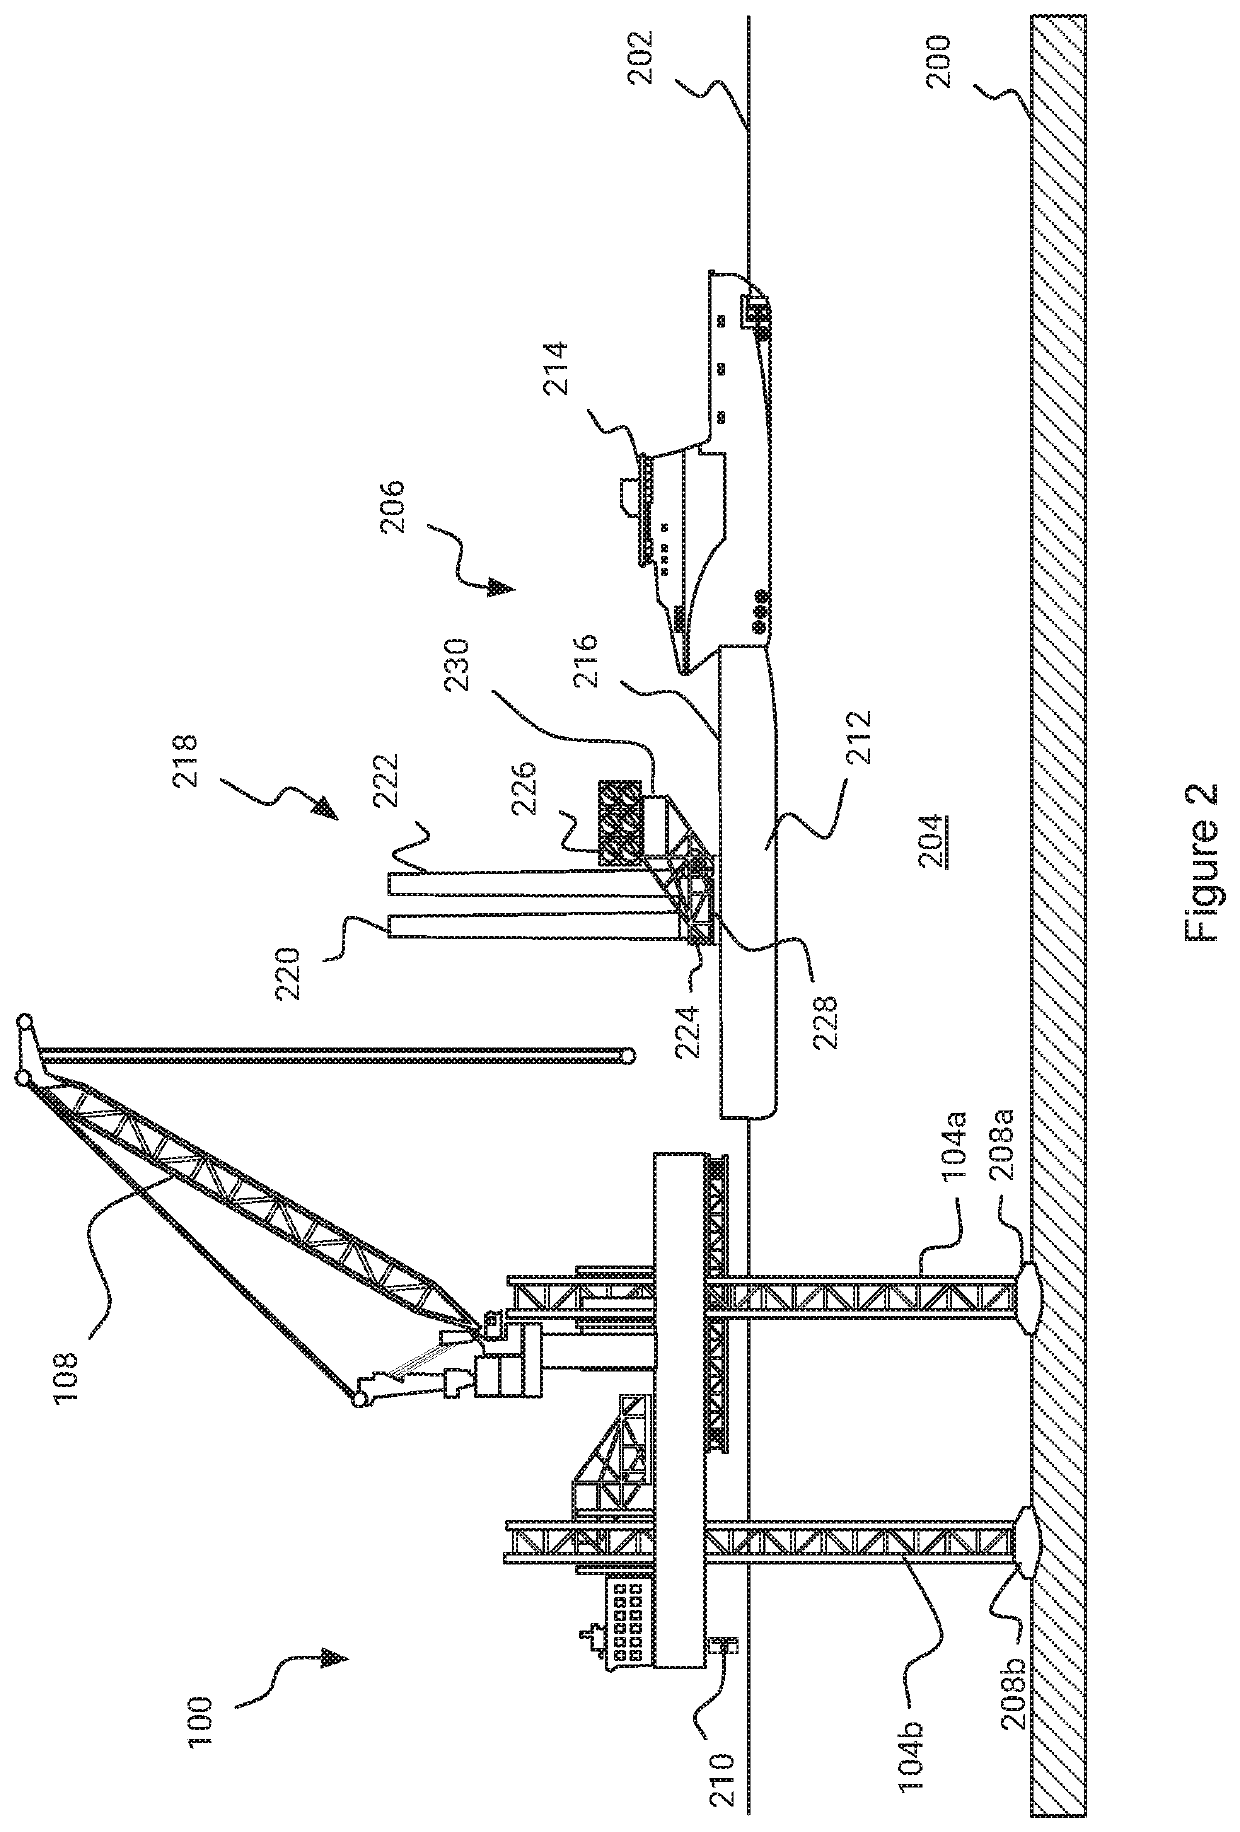 Method of securing and transferring a load between a vessel and an offshore installation and an apparatus therefor